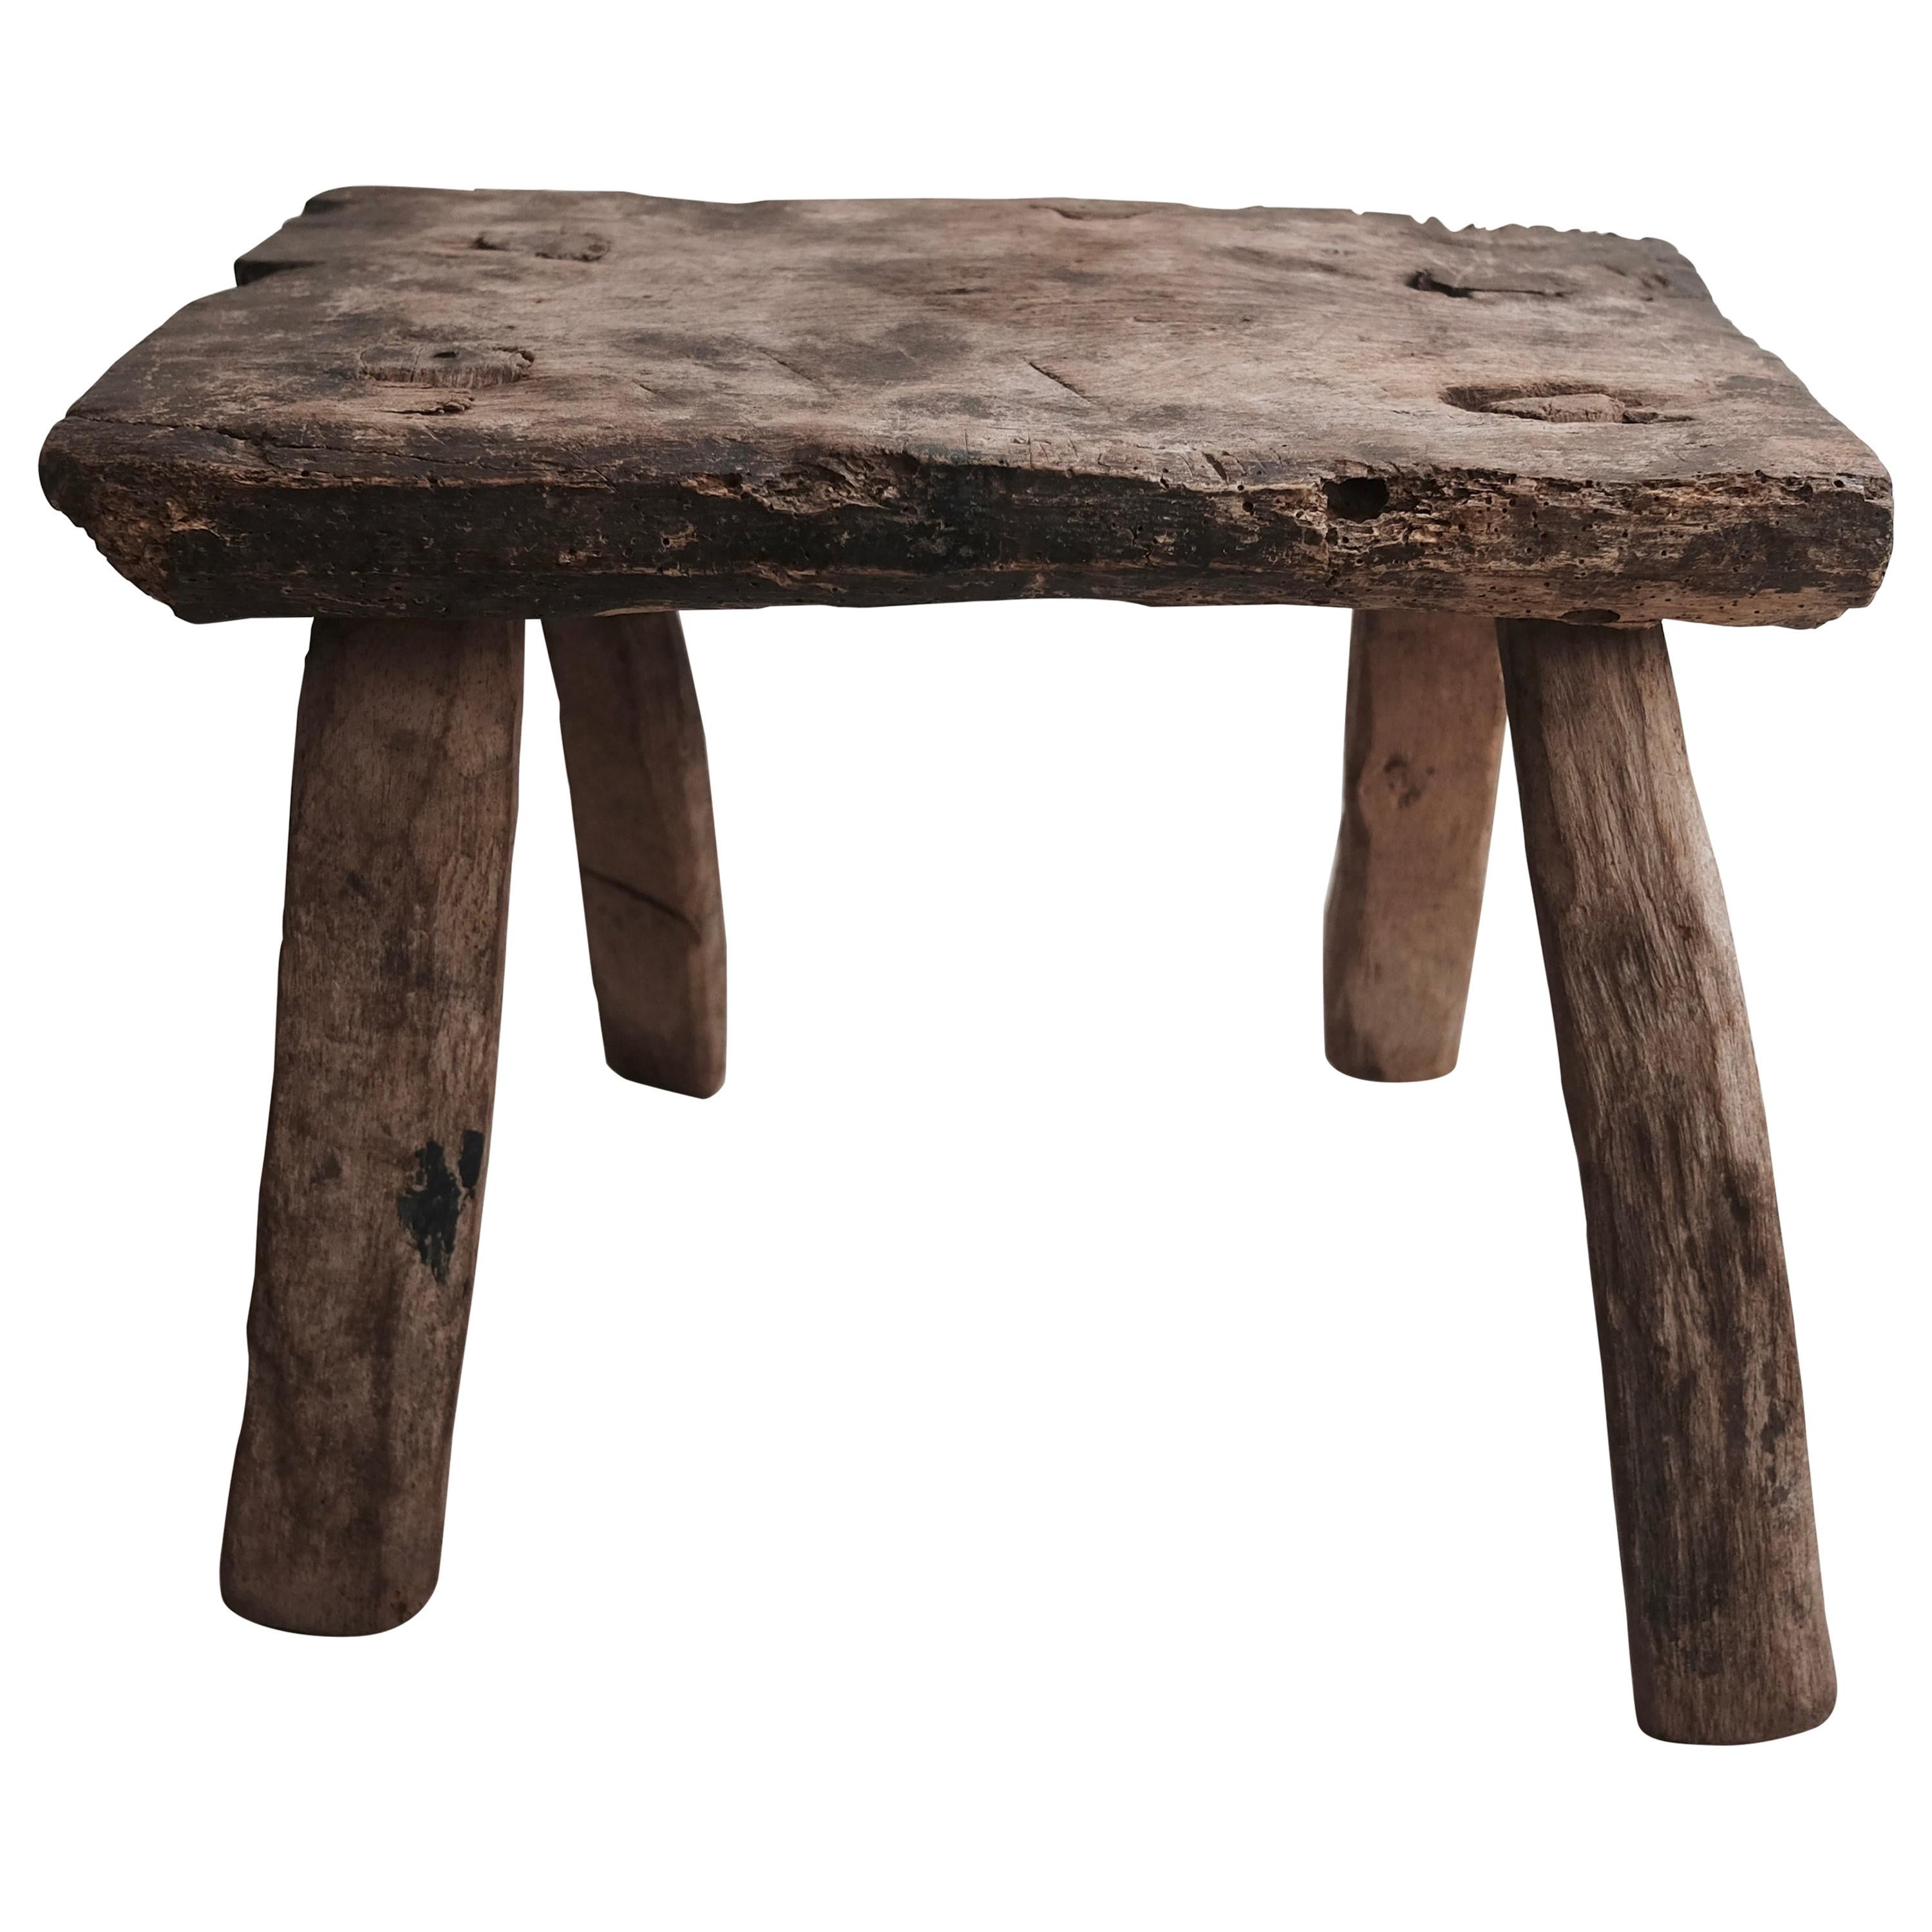 Mesquite Milking Stool from Mexico, circa 1940s